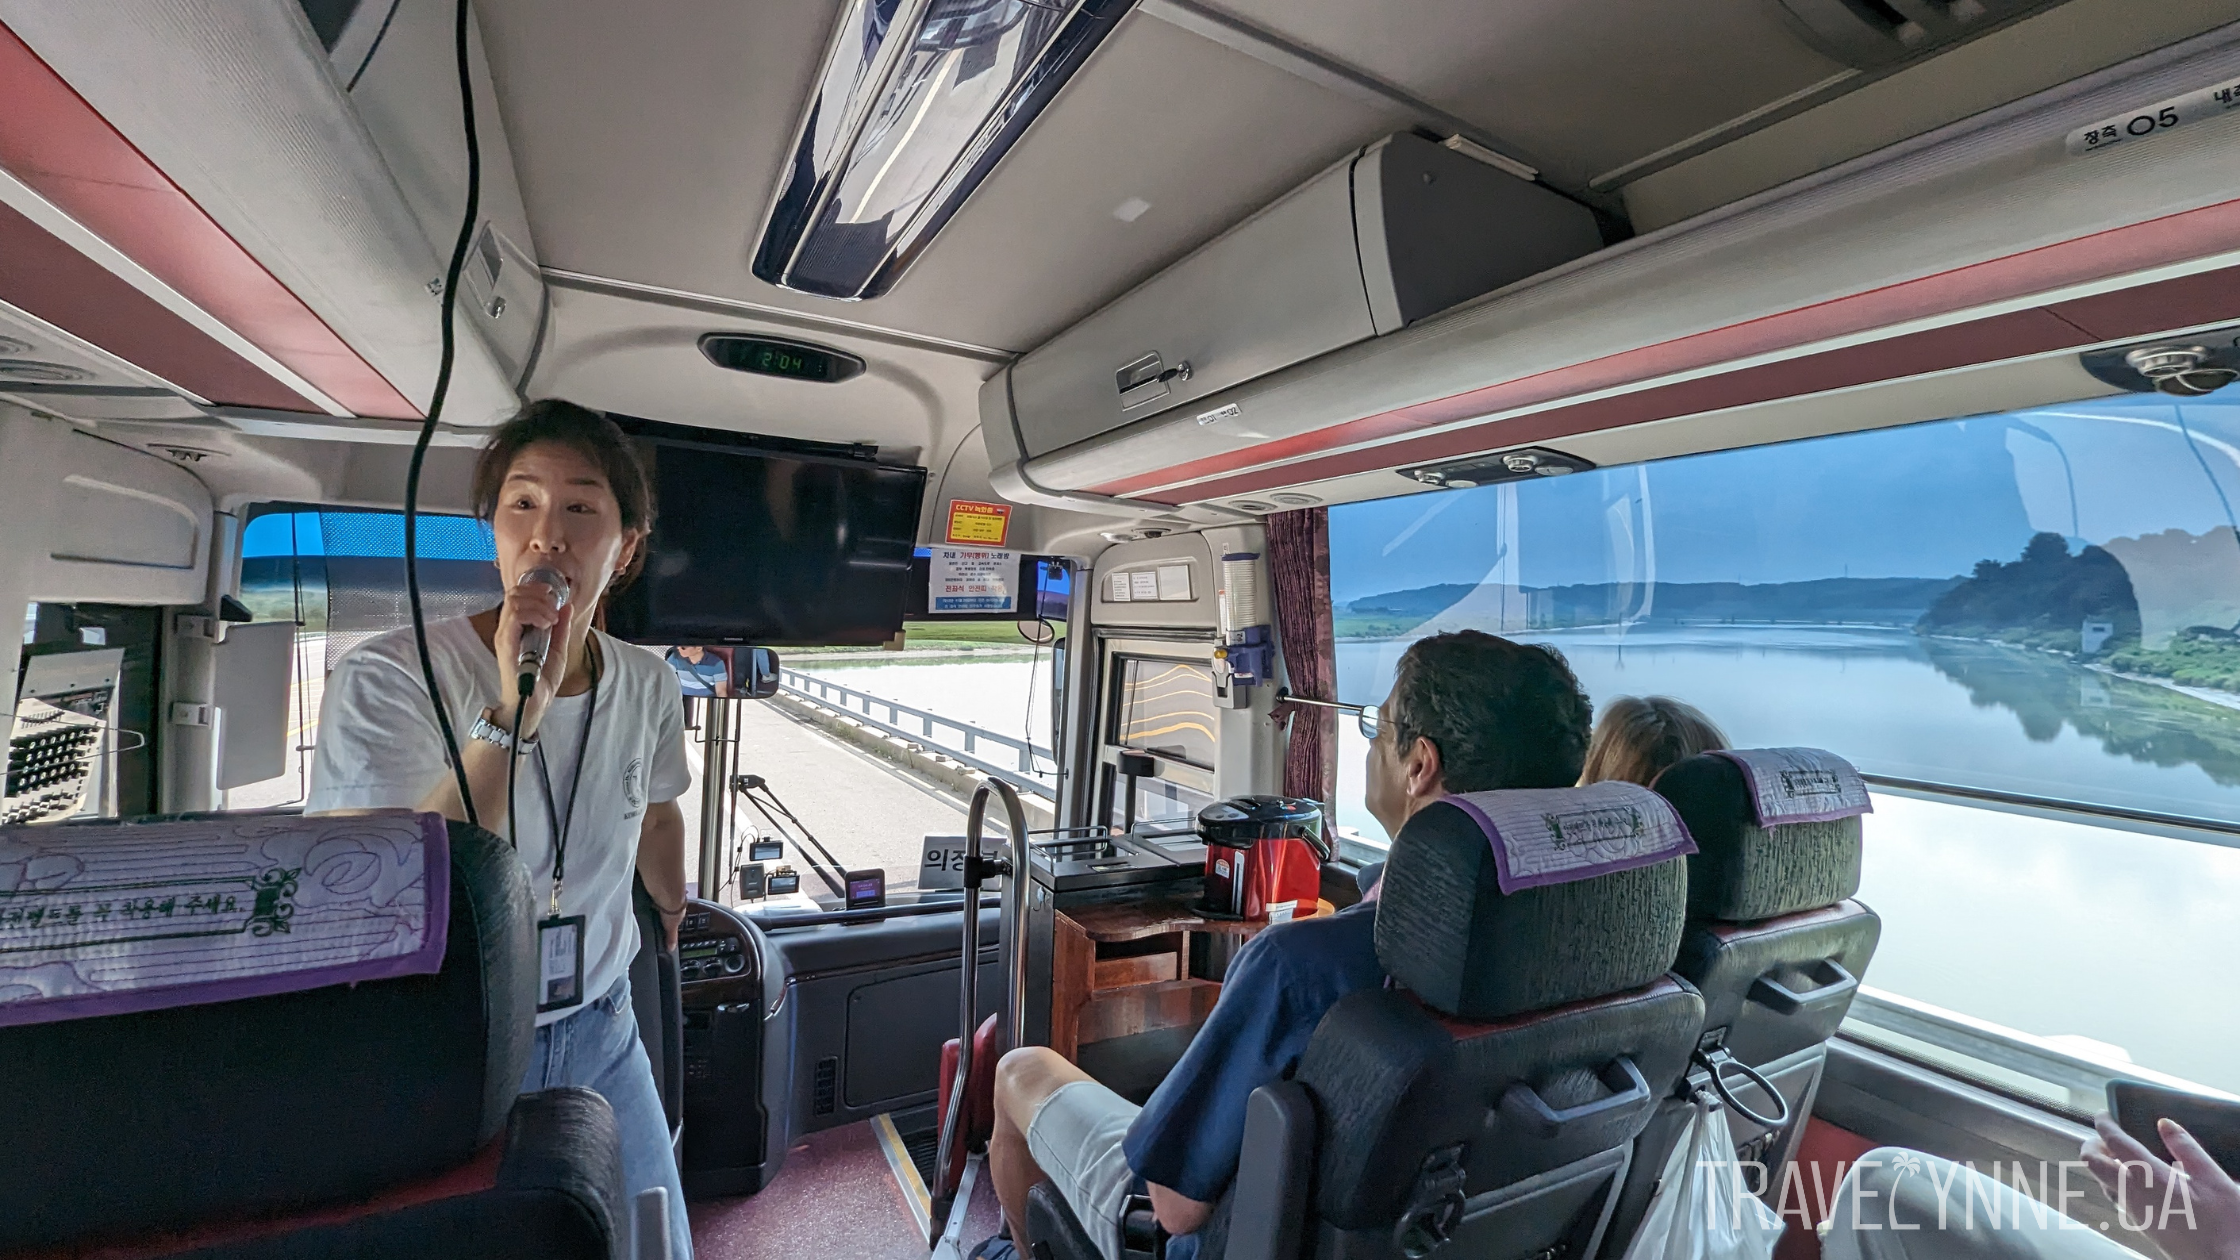 Our South Korean tour guide, Jenny, speaks into a microphone as we drive out of the DMZ in our tour bus.